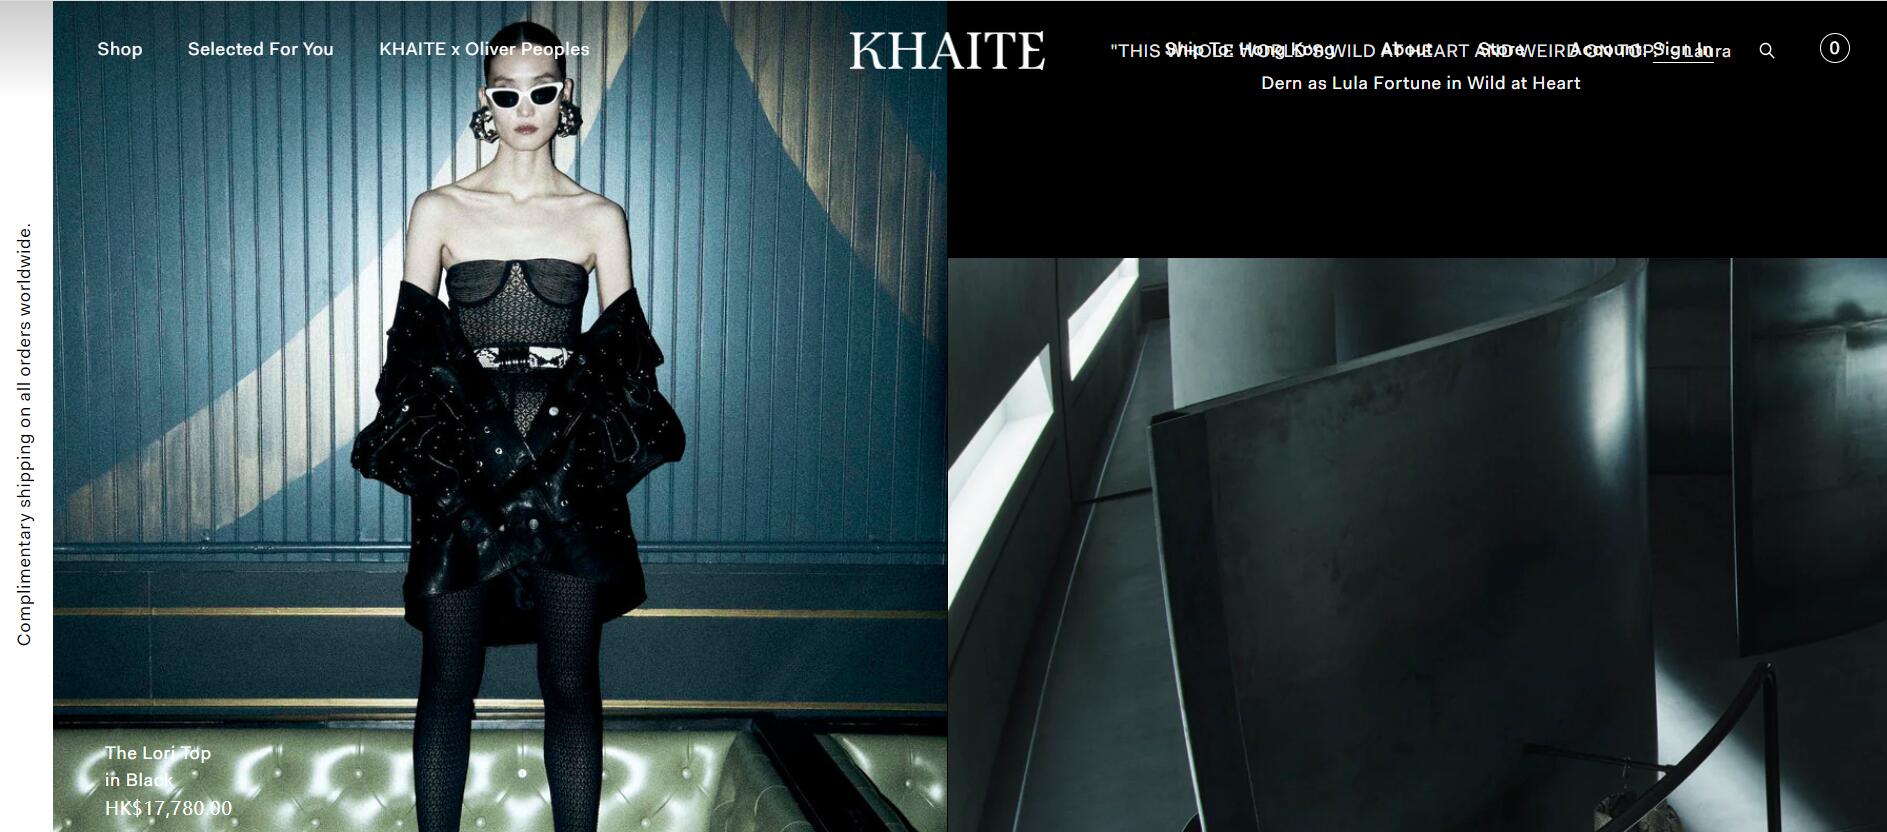 New York Designer Brand Khaite Secures New Investment To Pursue Its Ambition of “Building the Foremost American Luxury Brand”